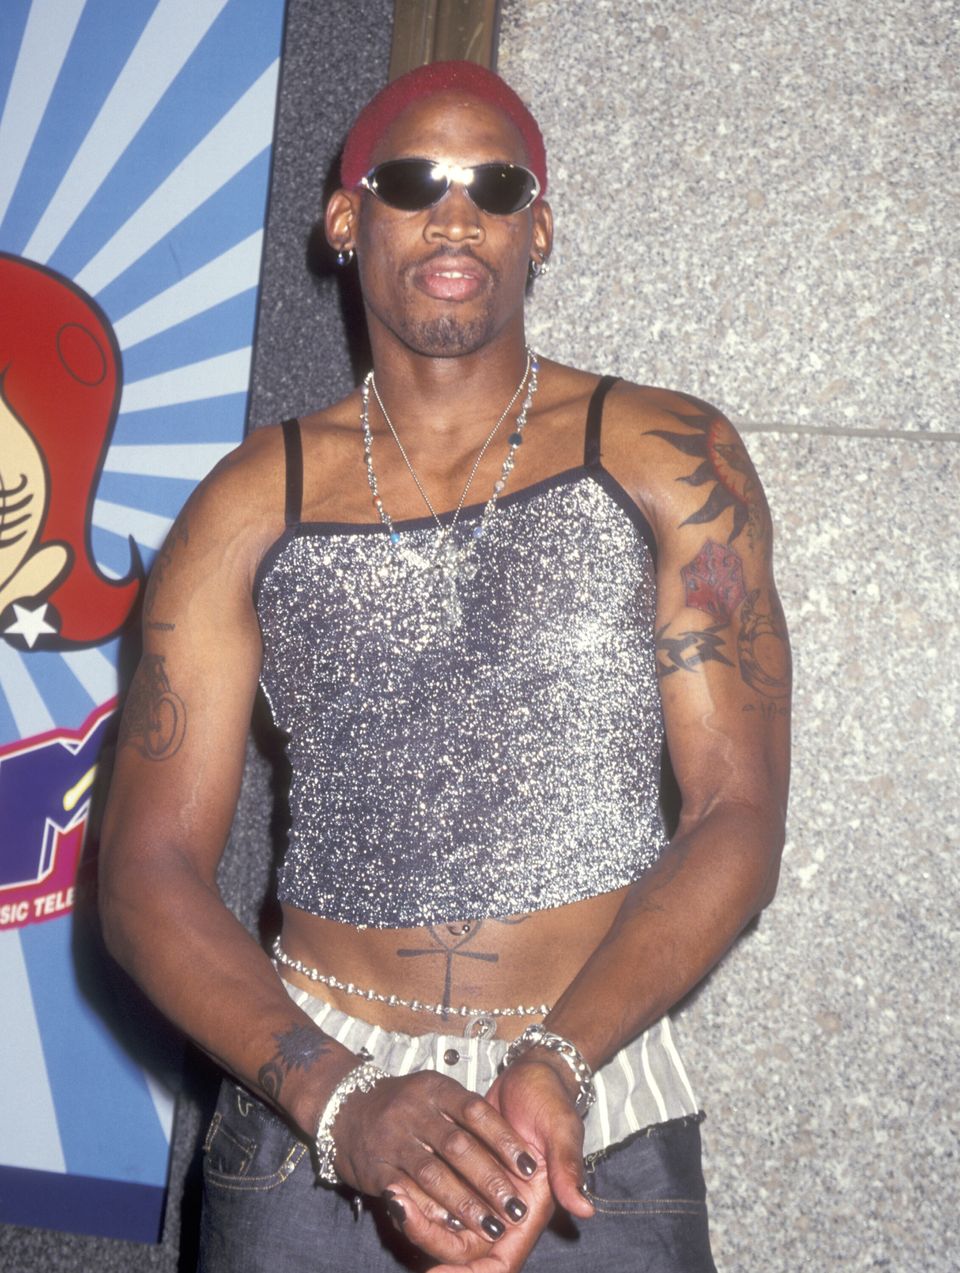 28 Photos Of Dennis Rodman's Iconic, Ridiculously Colorful Hair